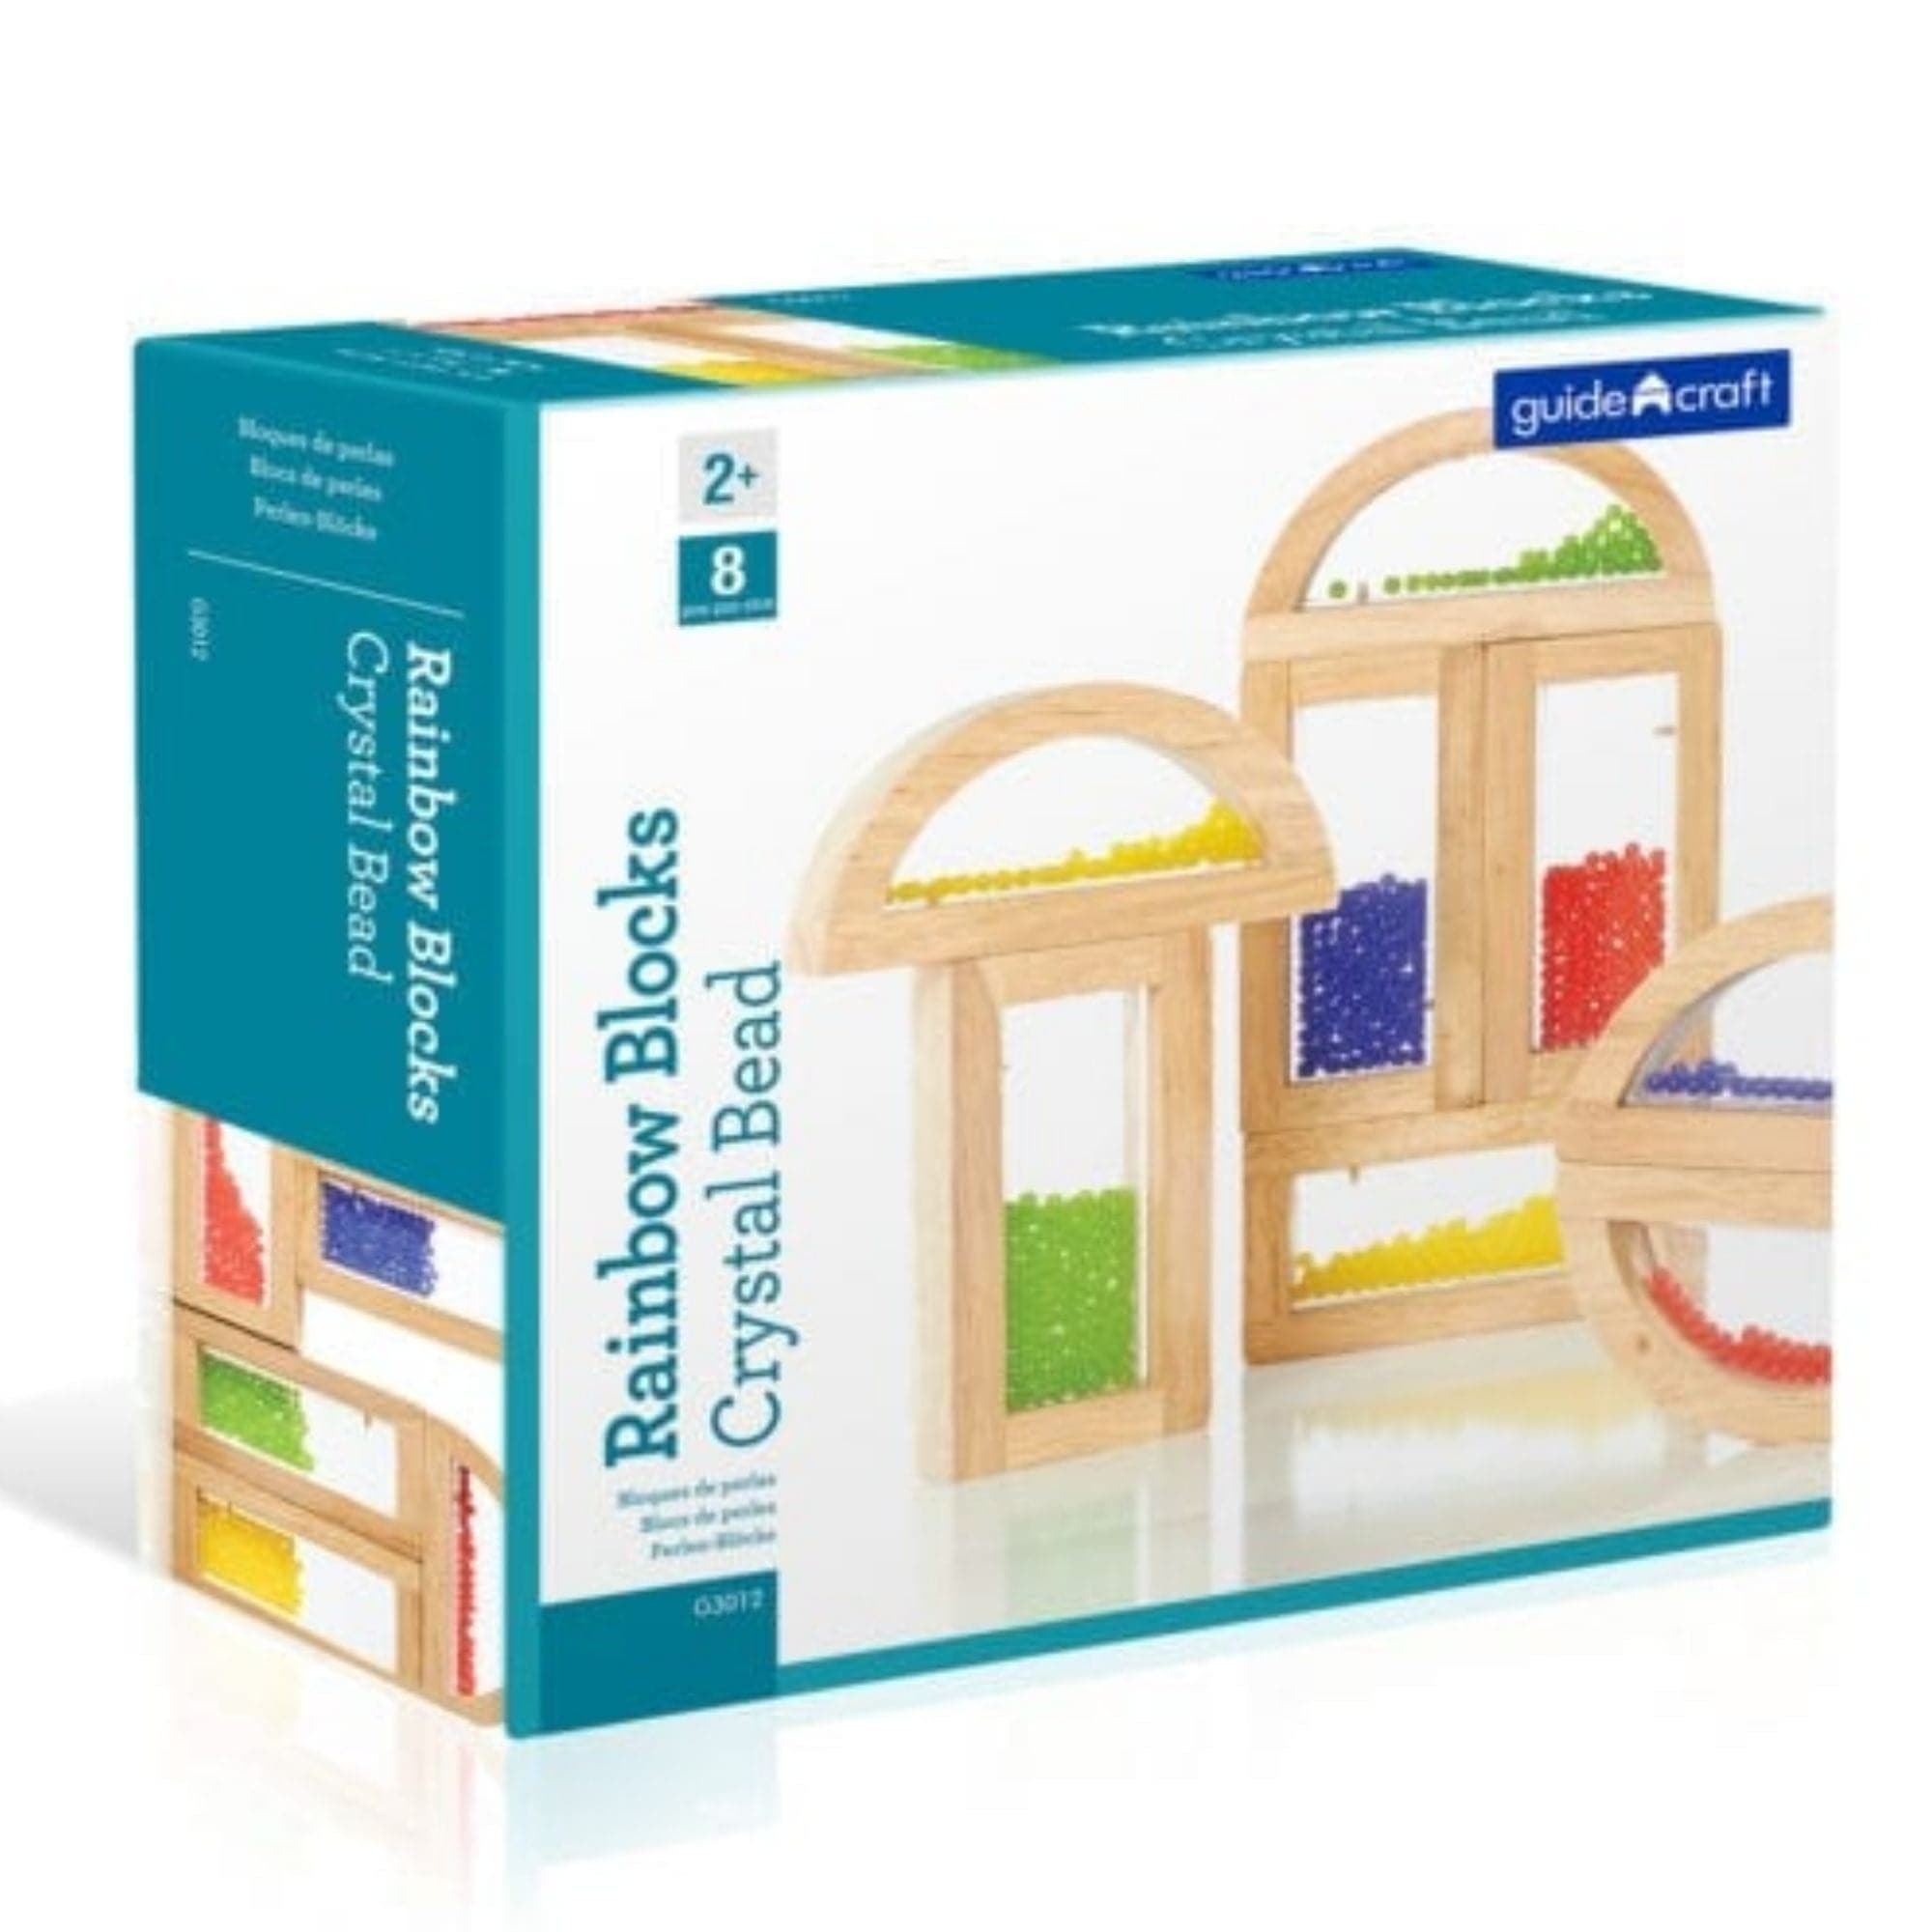 Guidecraft Rainbow Blocks Crystal Bead, The Guidecraft Rainbow Blocks Crystal Bead are a great addition to the block play family. Smooth hardwood frames with primary colored plexi windows;. The Guidecraft Rainbow Blocks Crystal Bead blocks are sized to standard unit block measurements. Eight blocks per package: 4 rectangle and 4 half moon shapes. Features plexi inner with colored beads. Guidecraft Rainbow Blocks Crystal Bead Solid wood frames with inset colored acrylic windows and colorful beads Set include